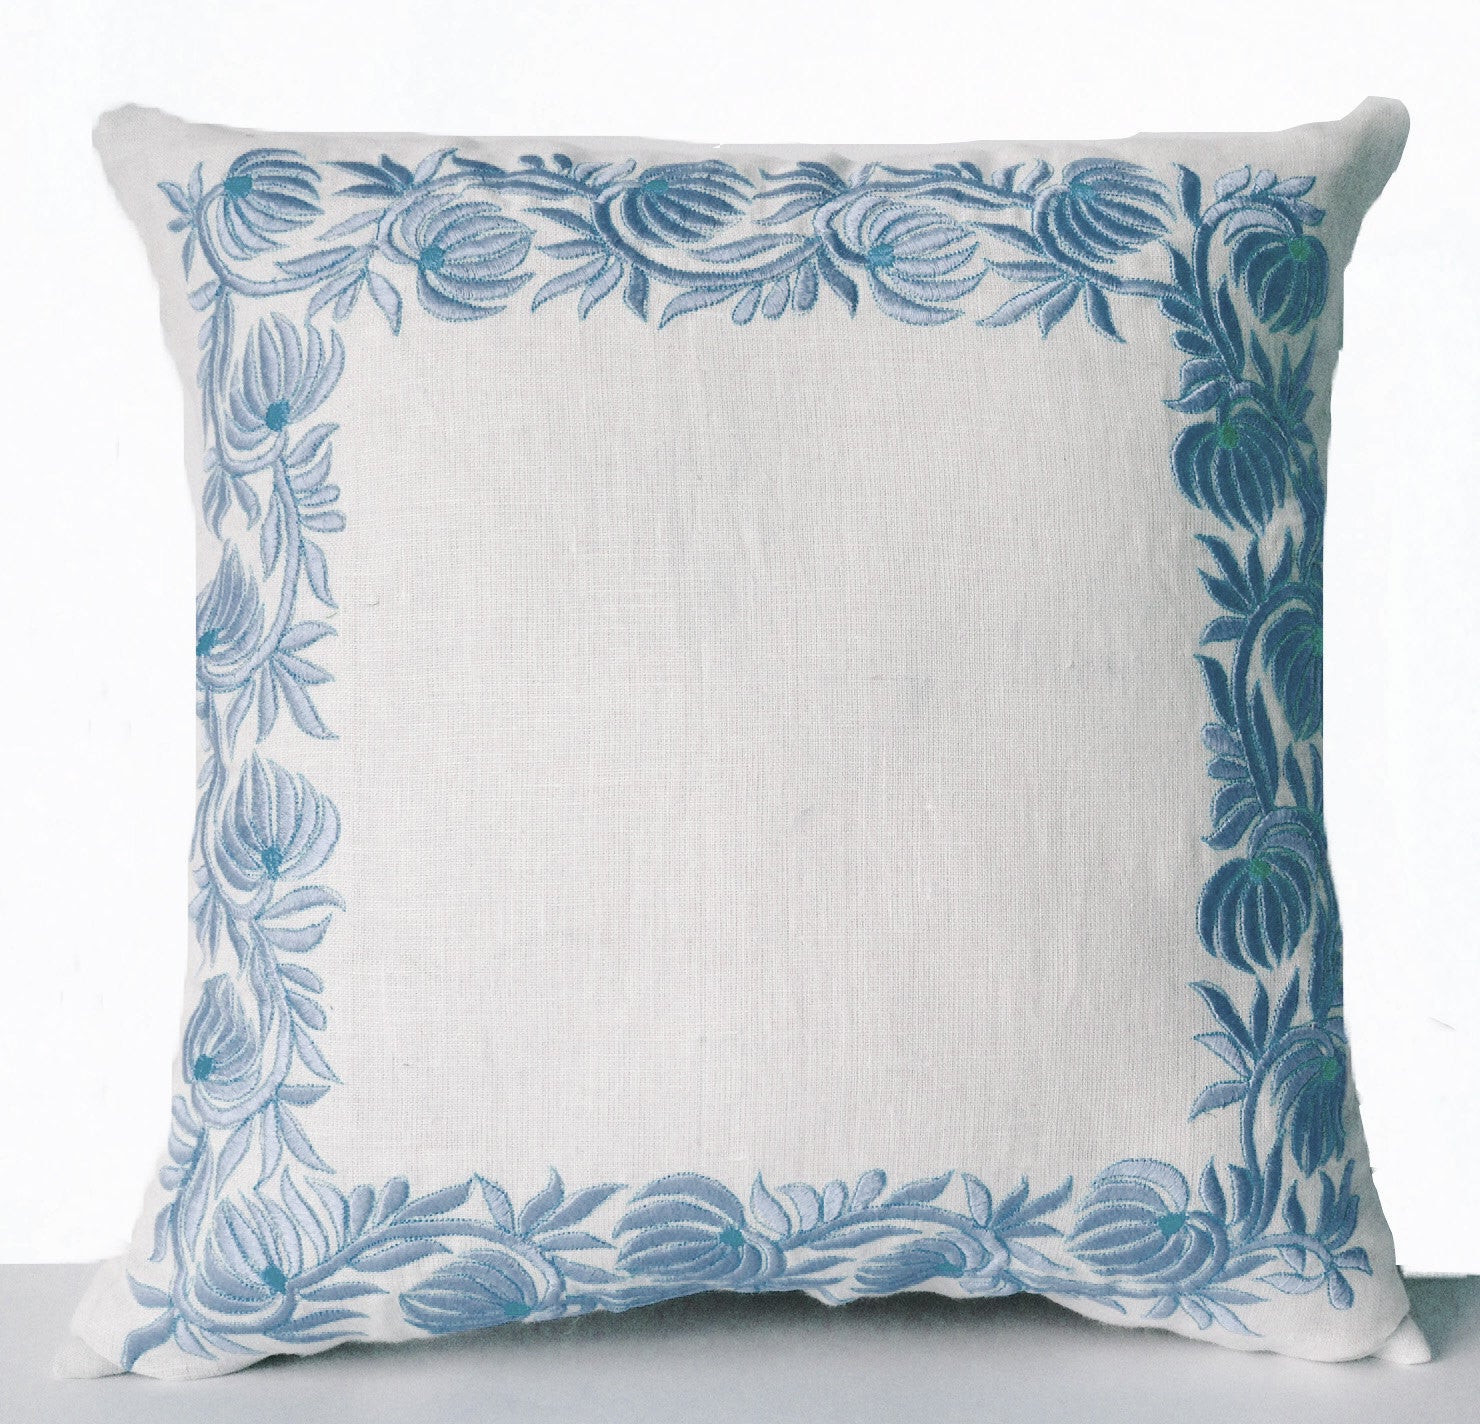 Handmade throw pillow case in white linen and flower embroidery